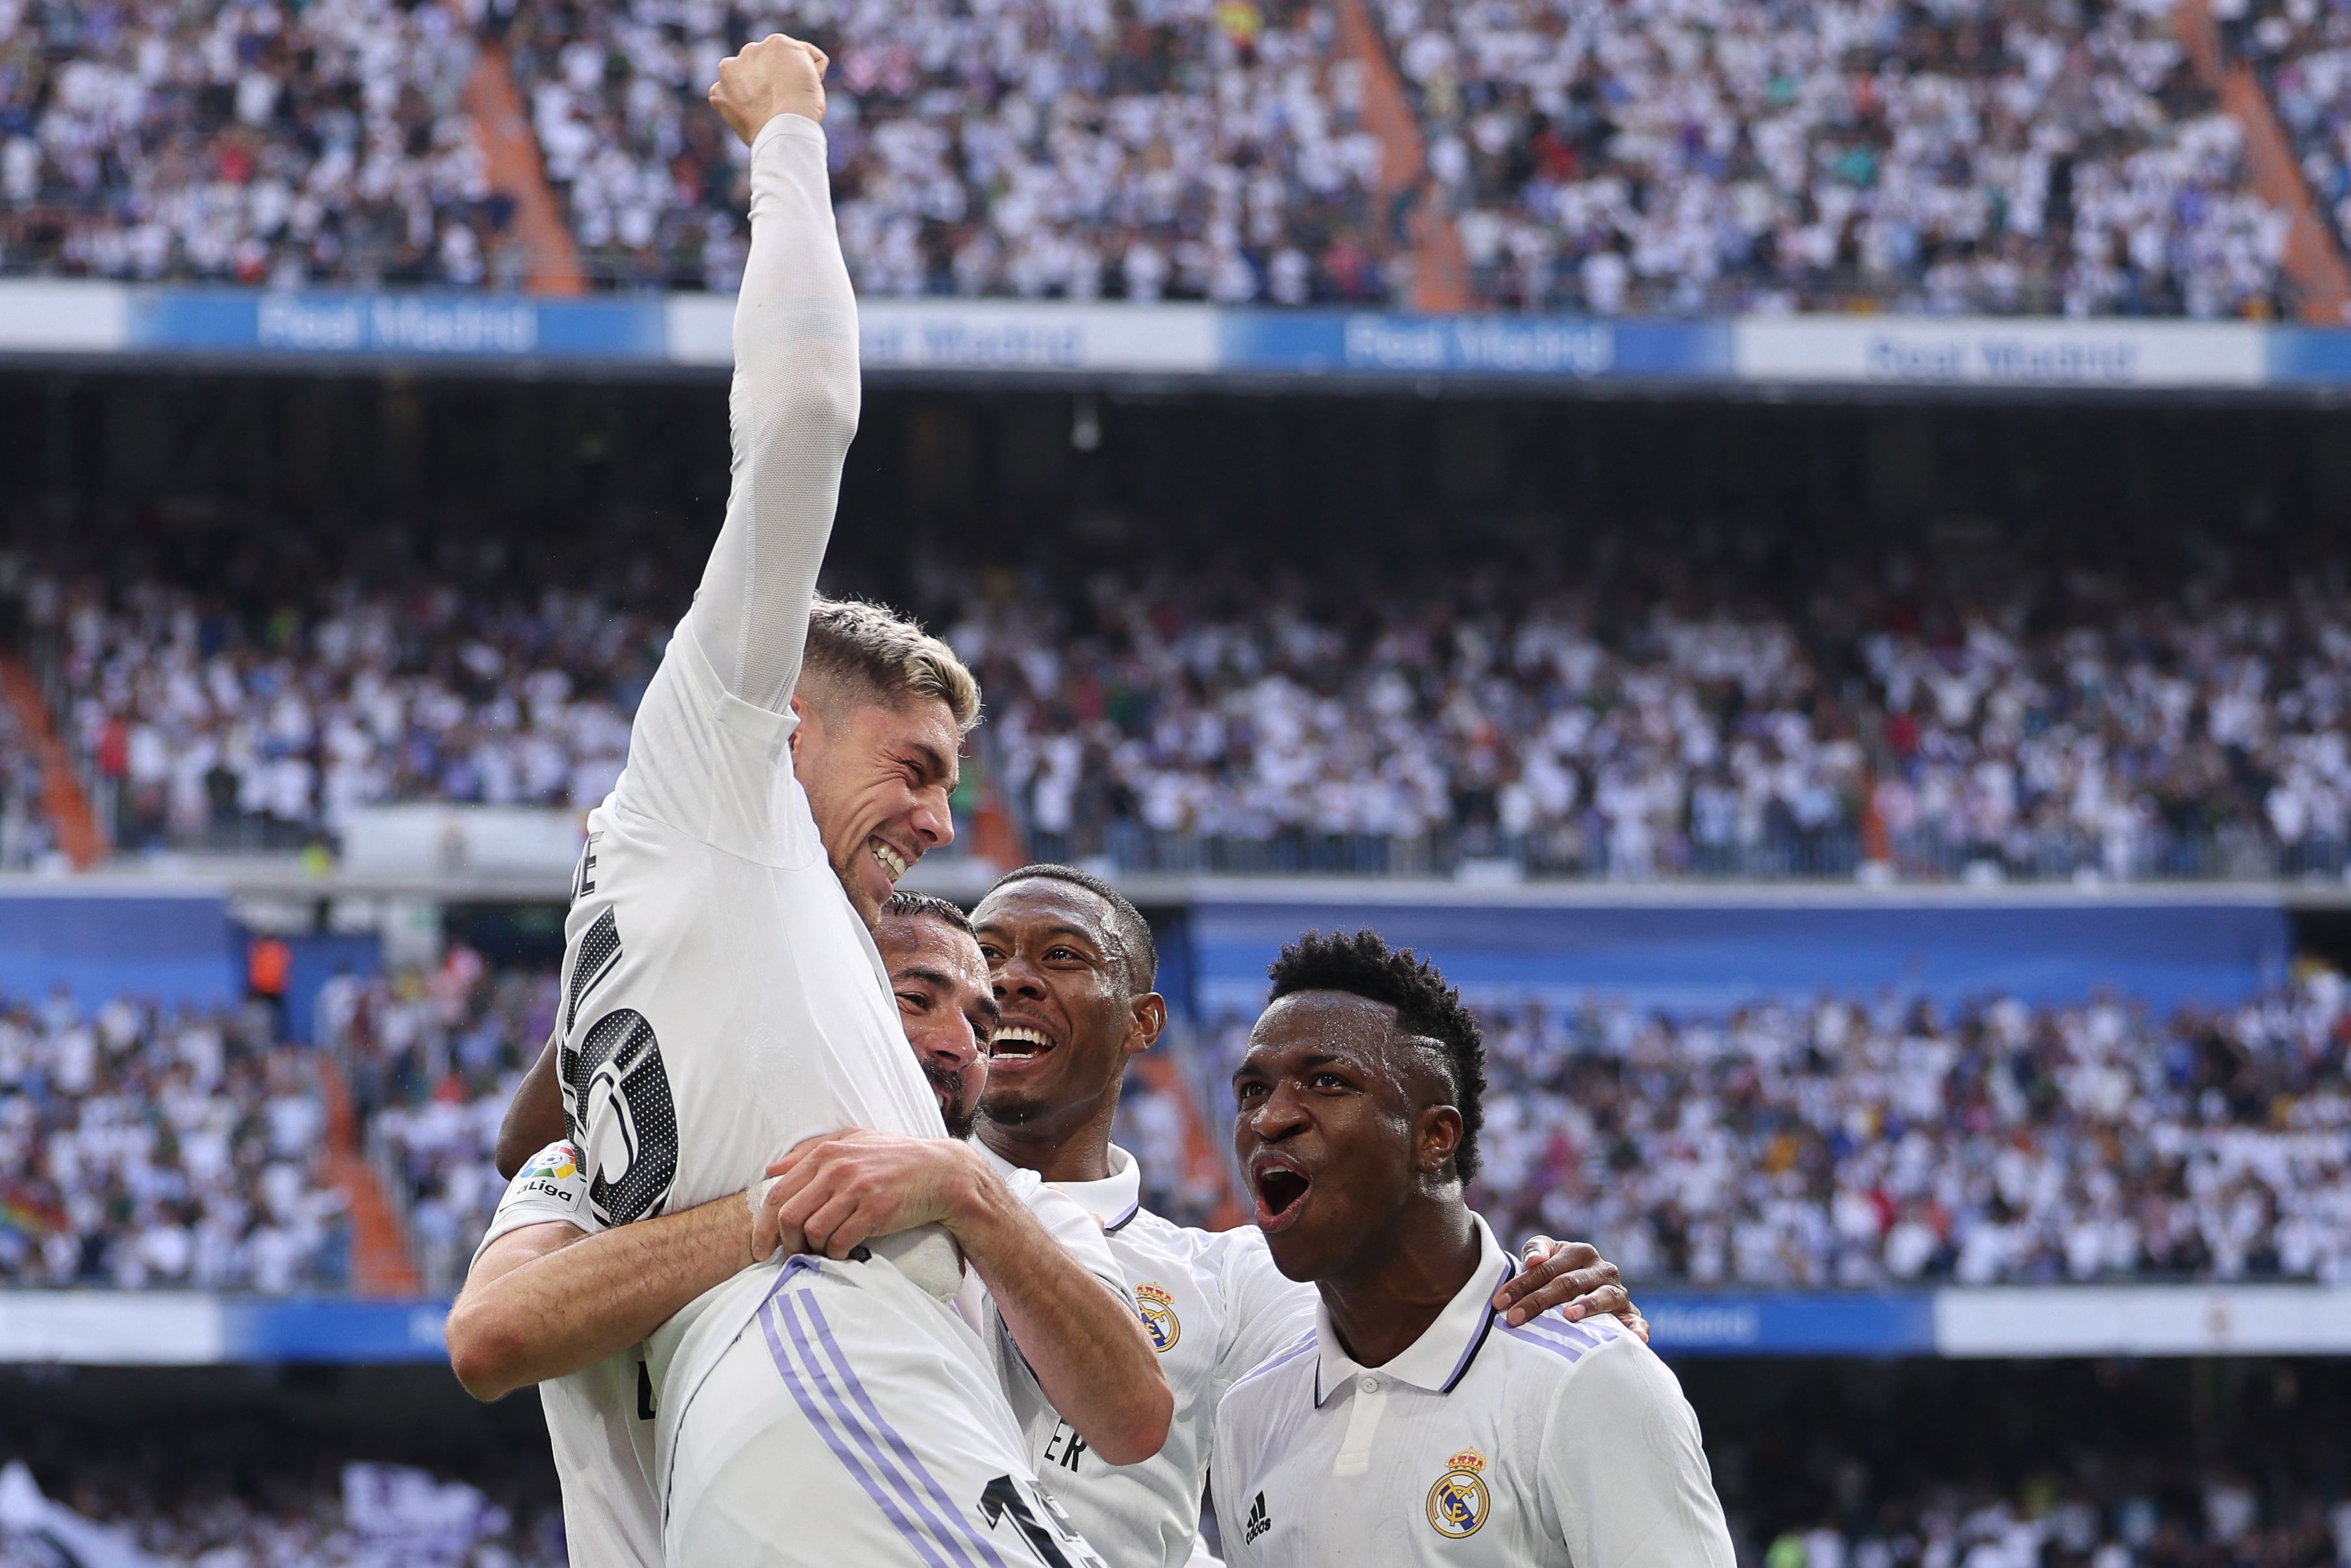 Real Madrid Set to Open a Theme Park in Dubai in 2023